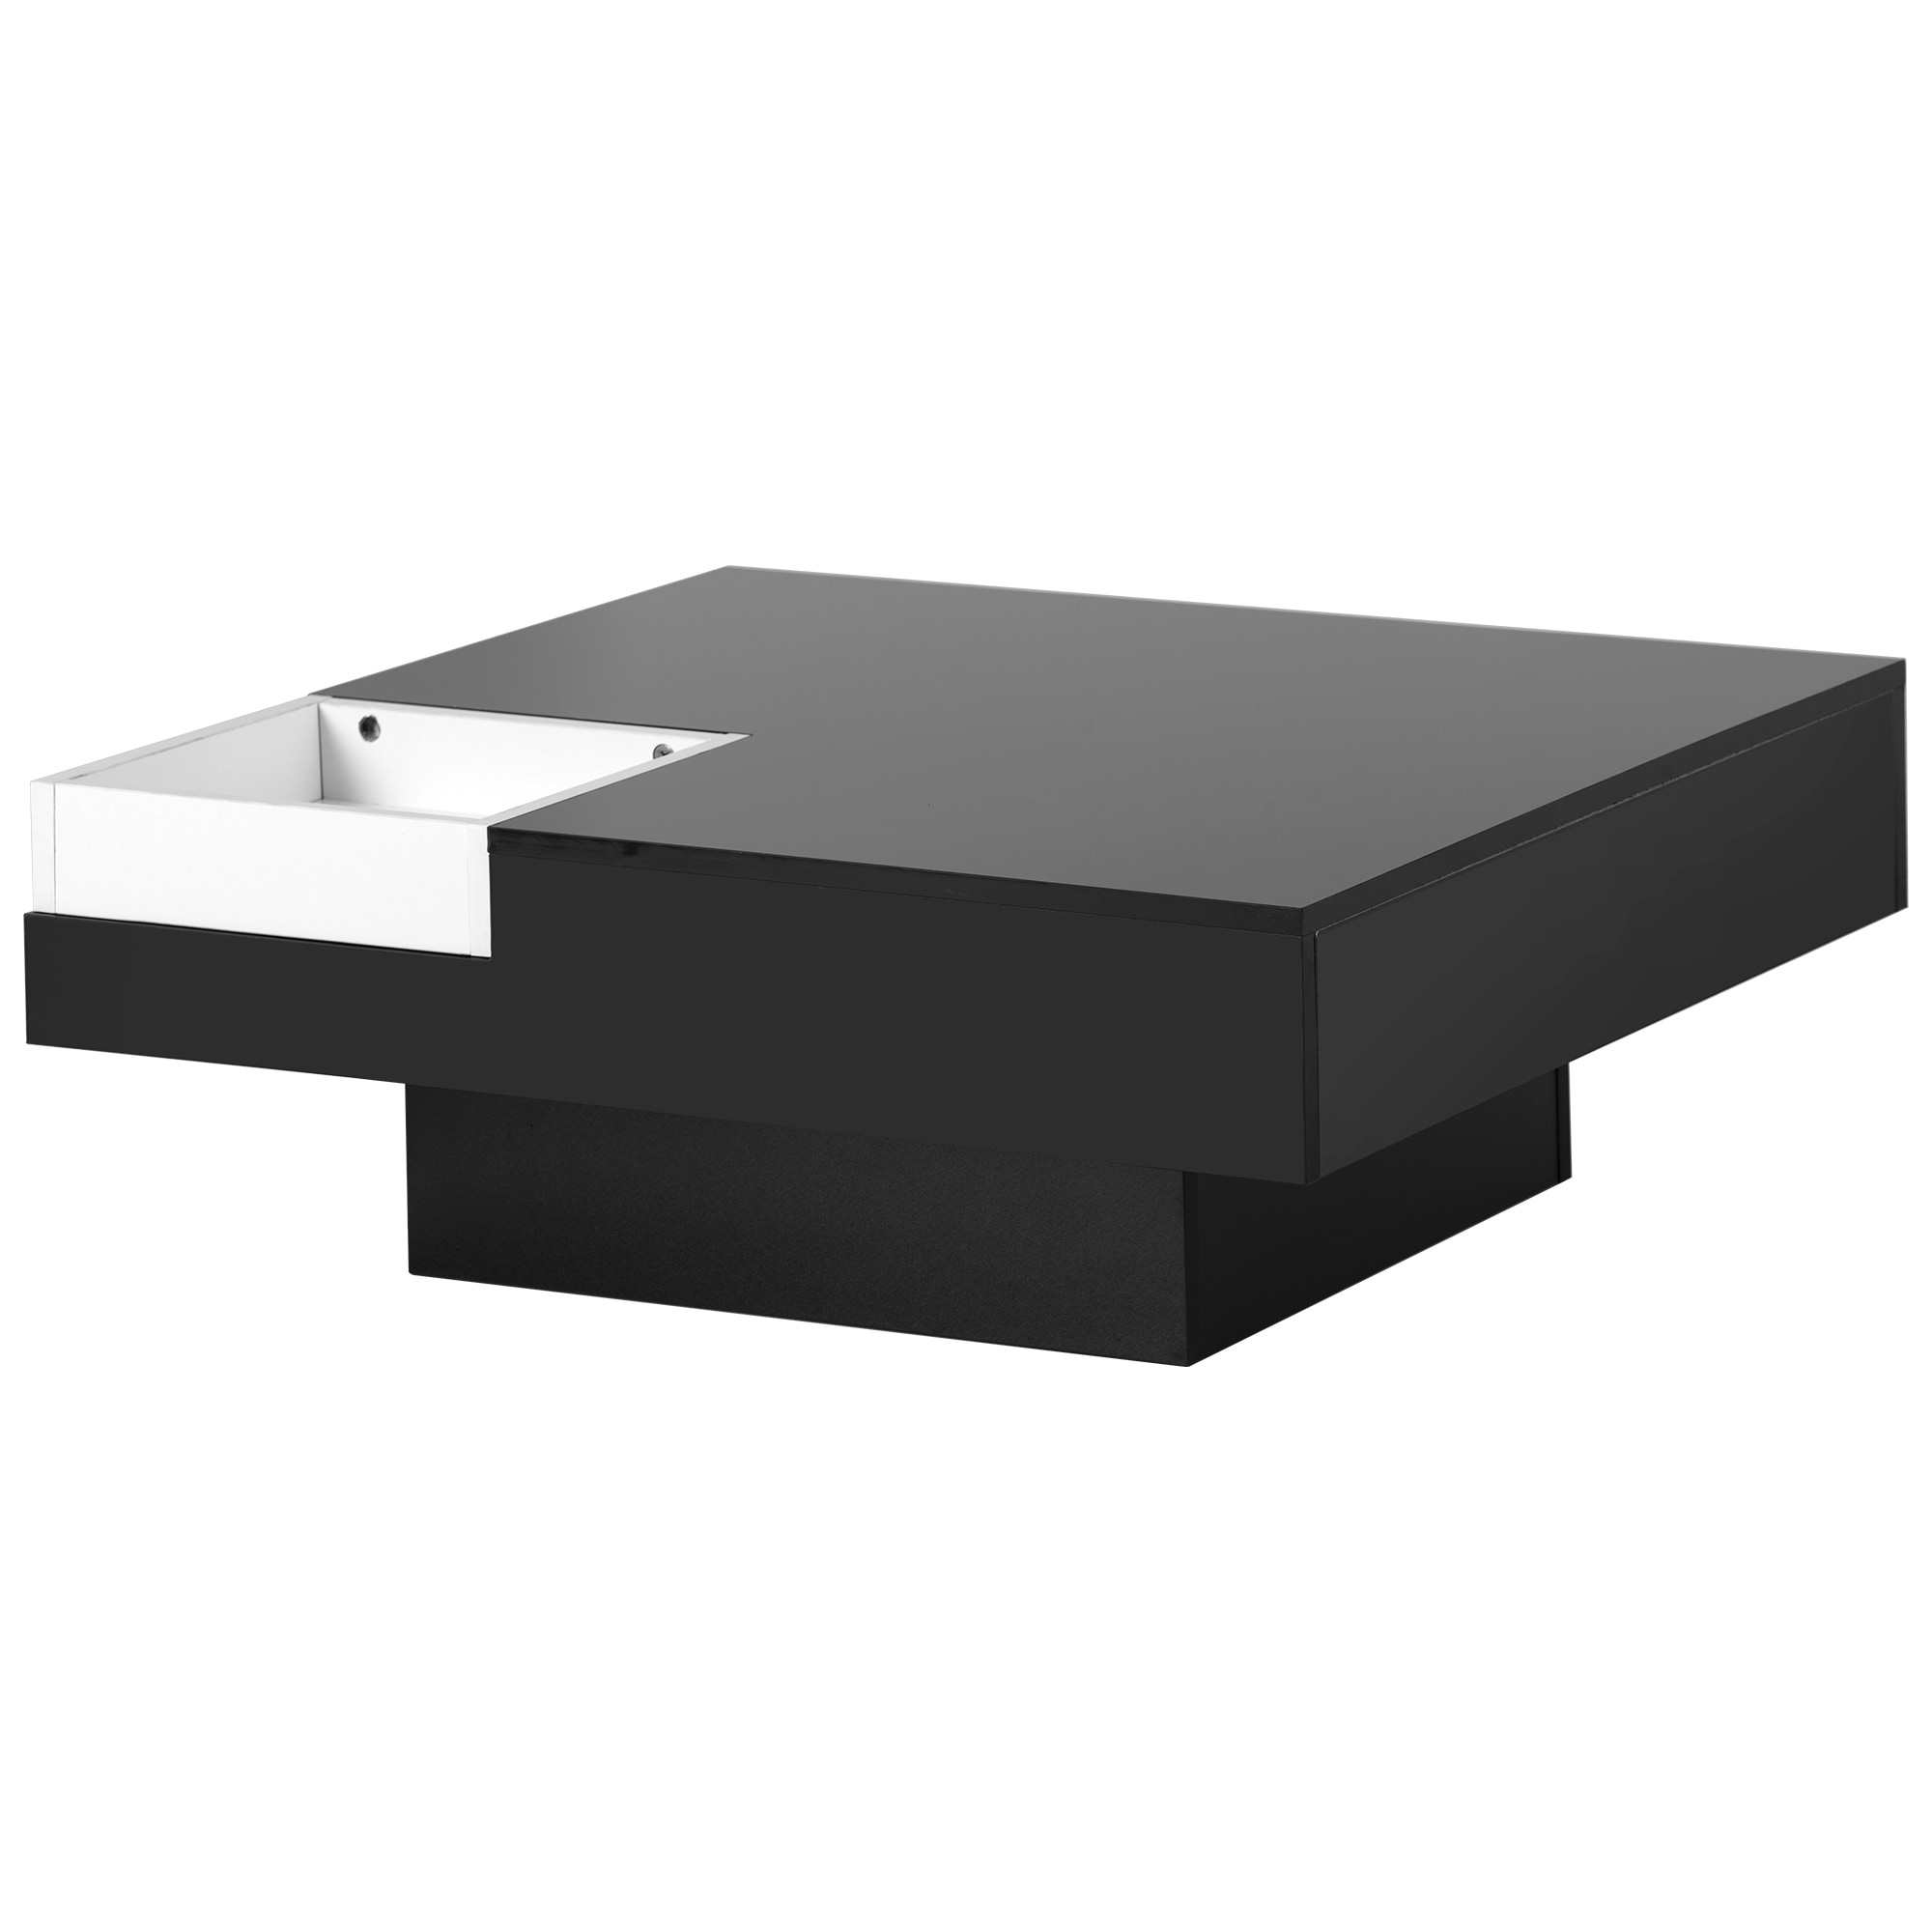 Minimalist Design Square Coffee Table with Detachable Tray and Plug-in 16-color LED Strip Lights Remote Control for Living Room